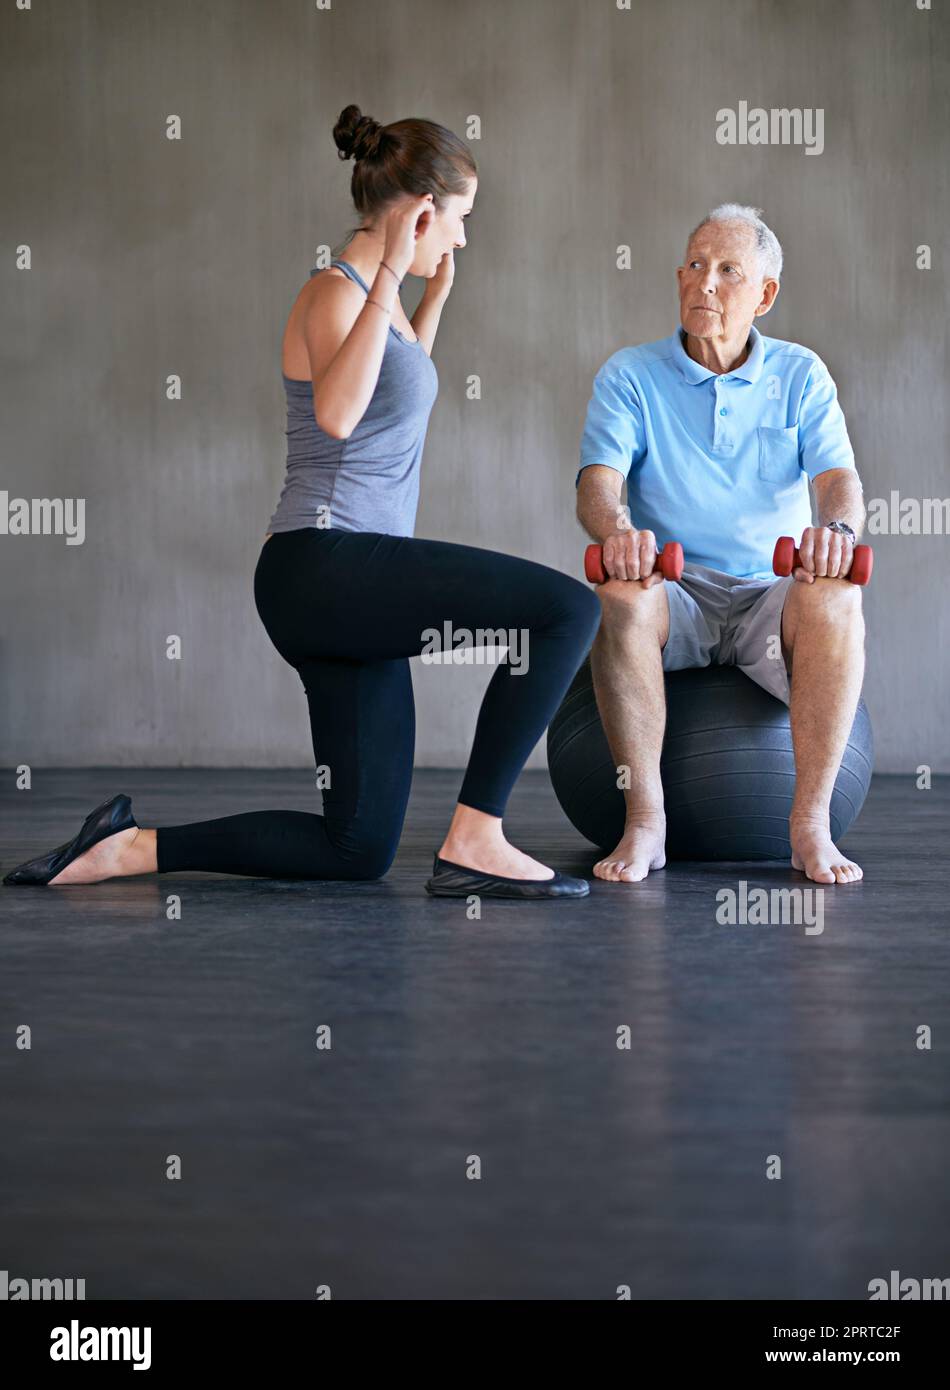 Helping my patients recover is my only priority. a a physical therapist working with a senior man. Stock Photo